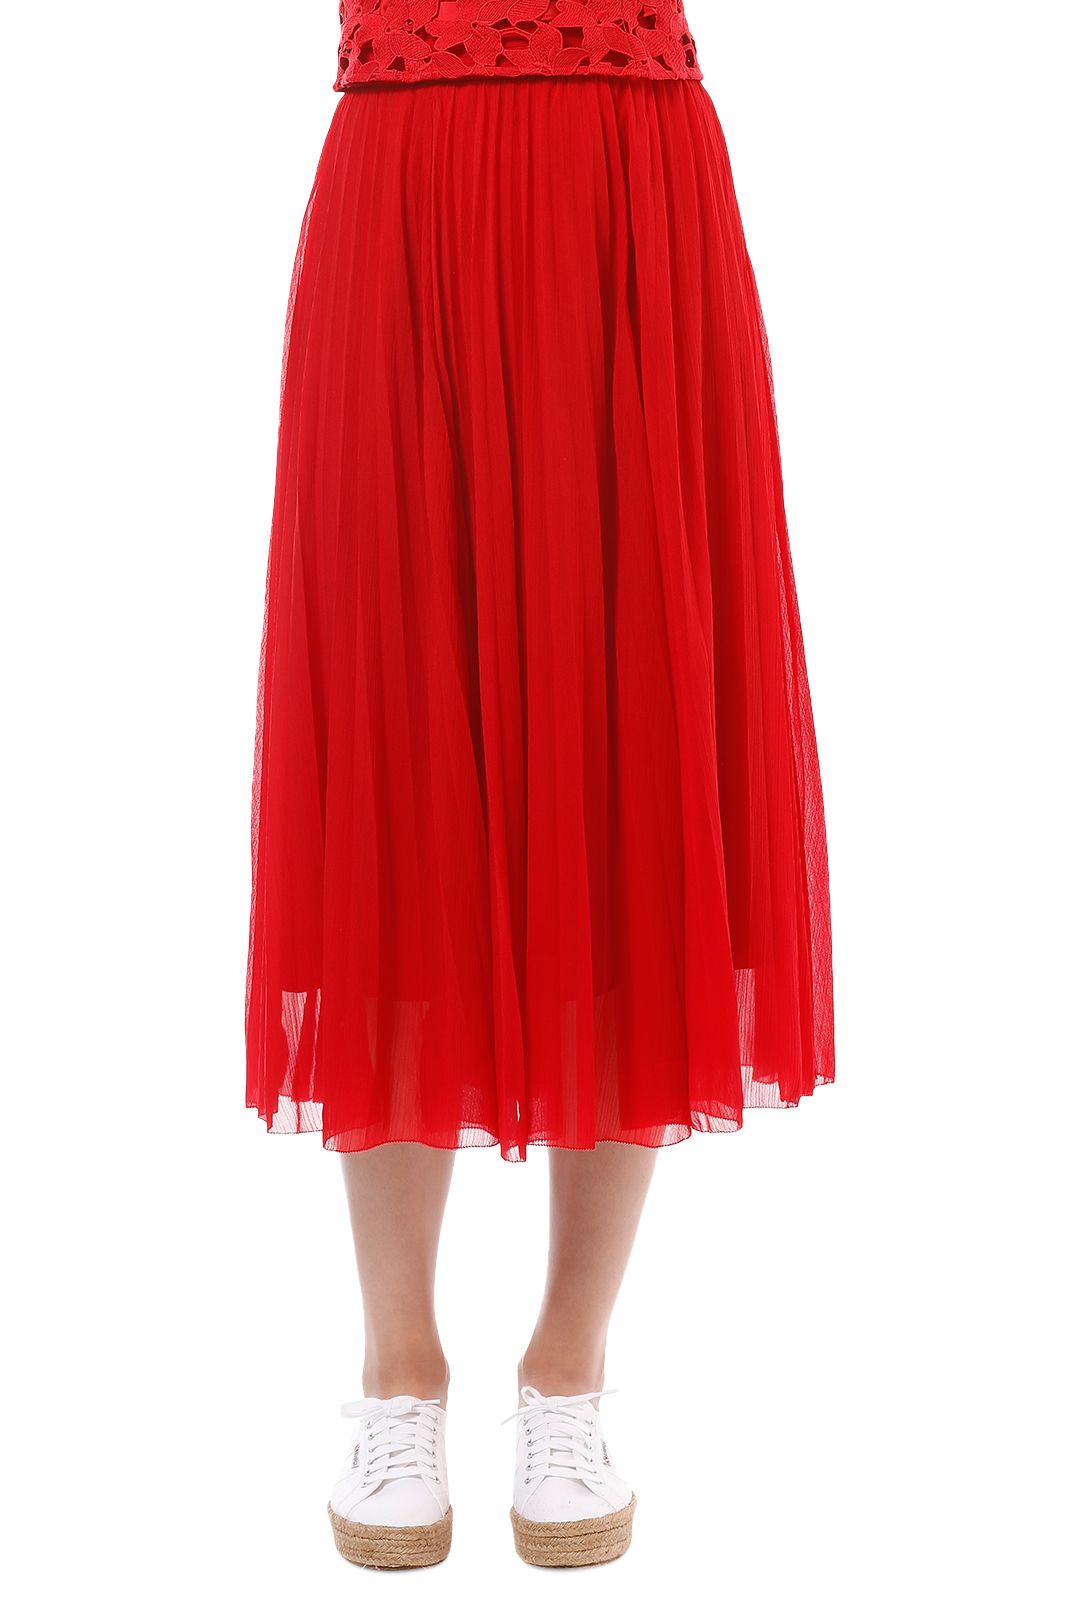 Saba - Cicely Midi Skirt - Red - Close Up